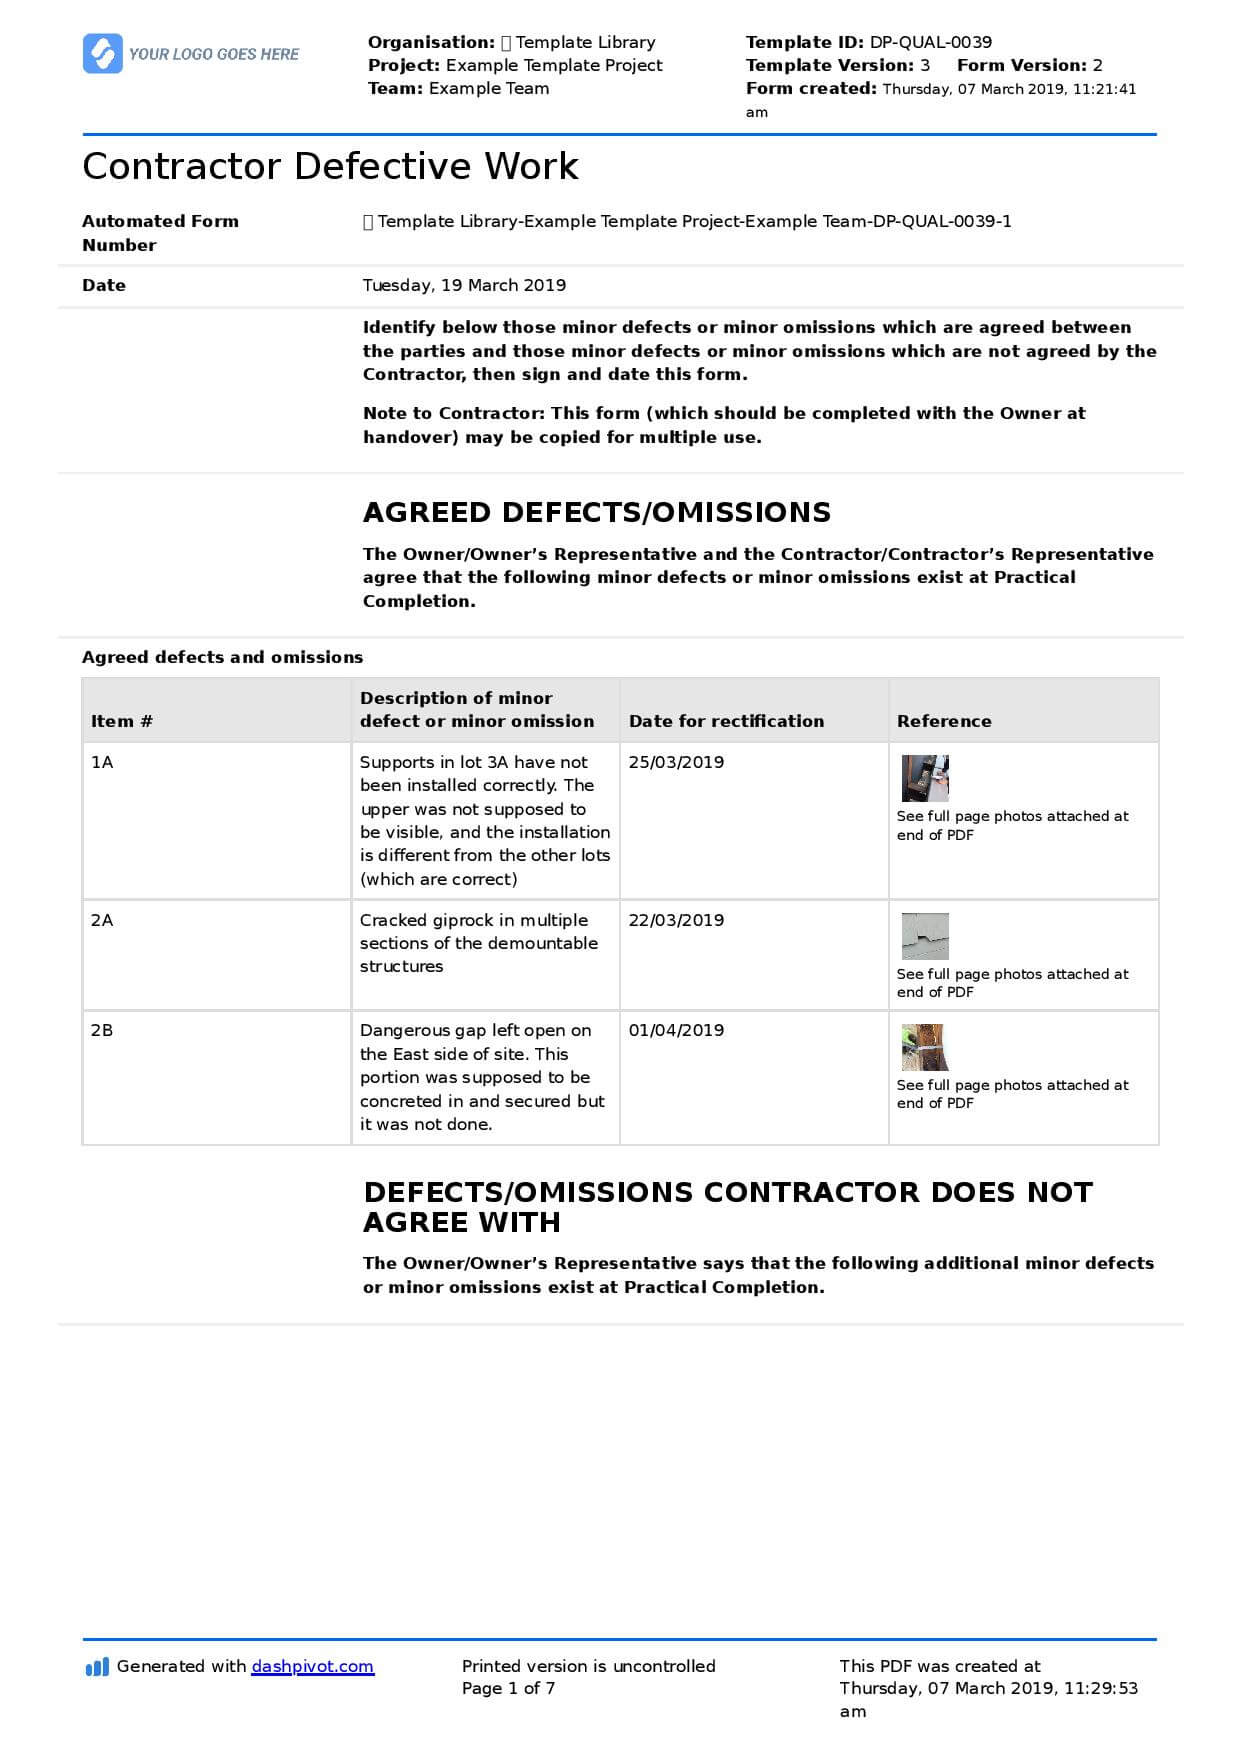 Letter To Contractor For Defective Work: Sample Letter And Regarding Construction Deficiency Report Template